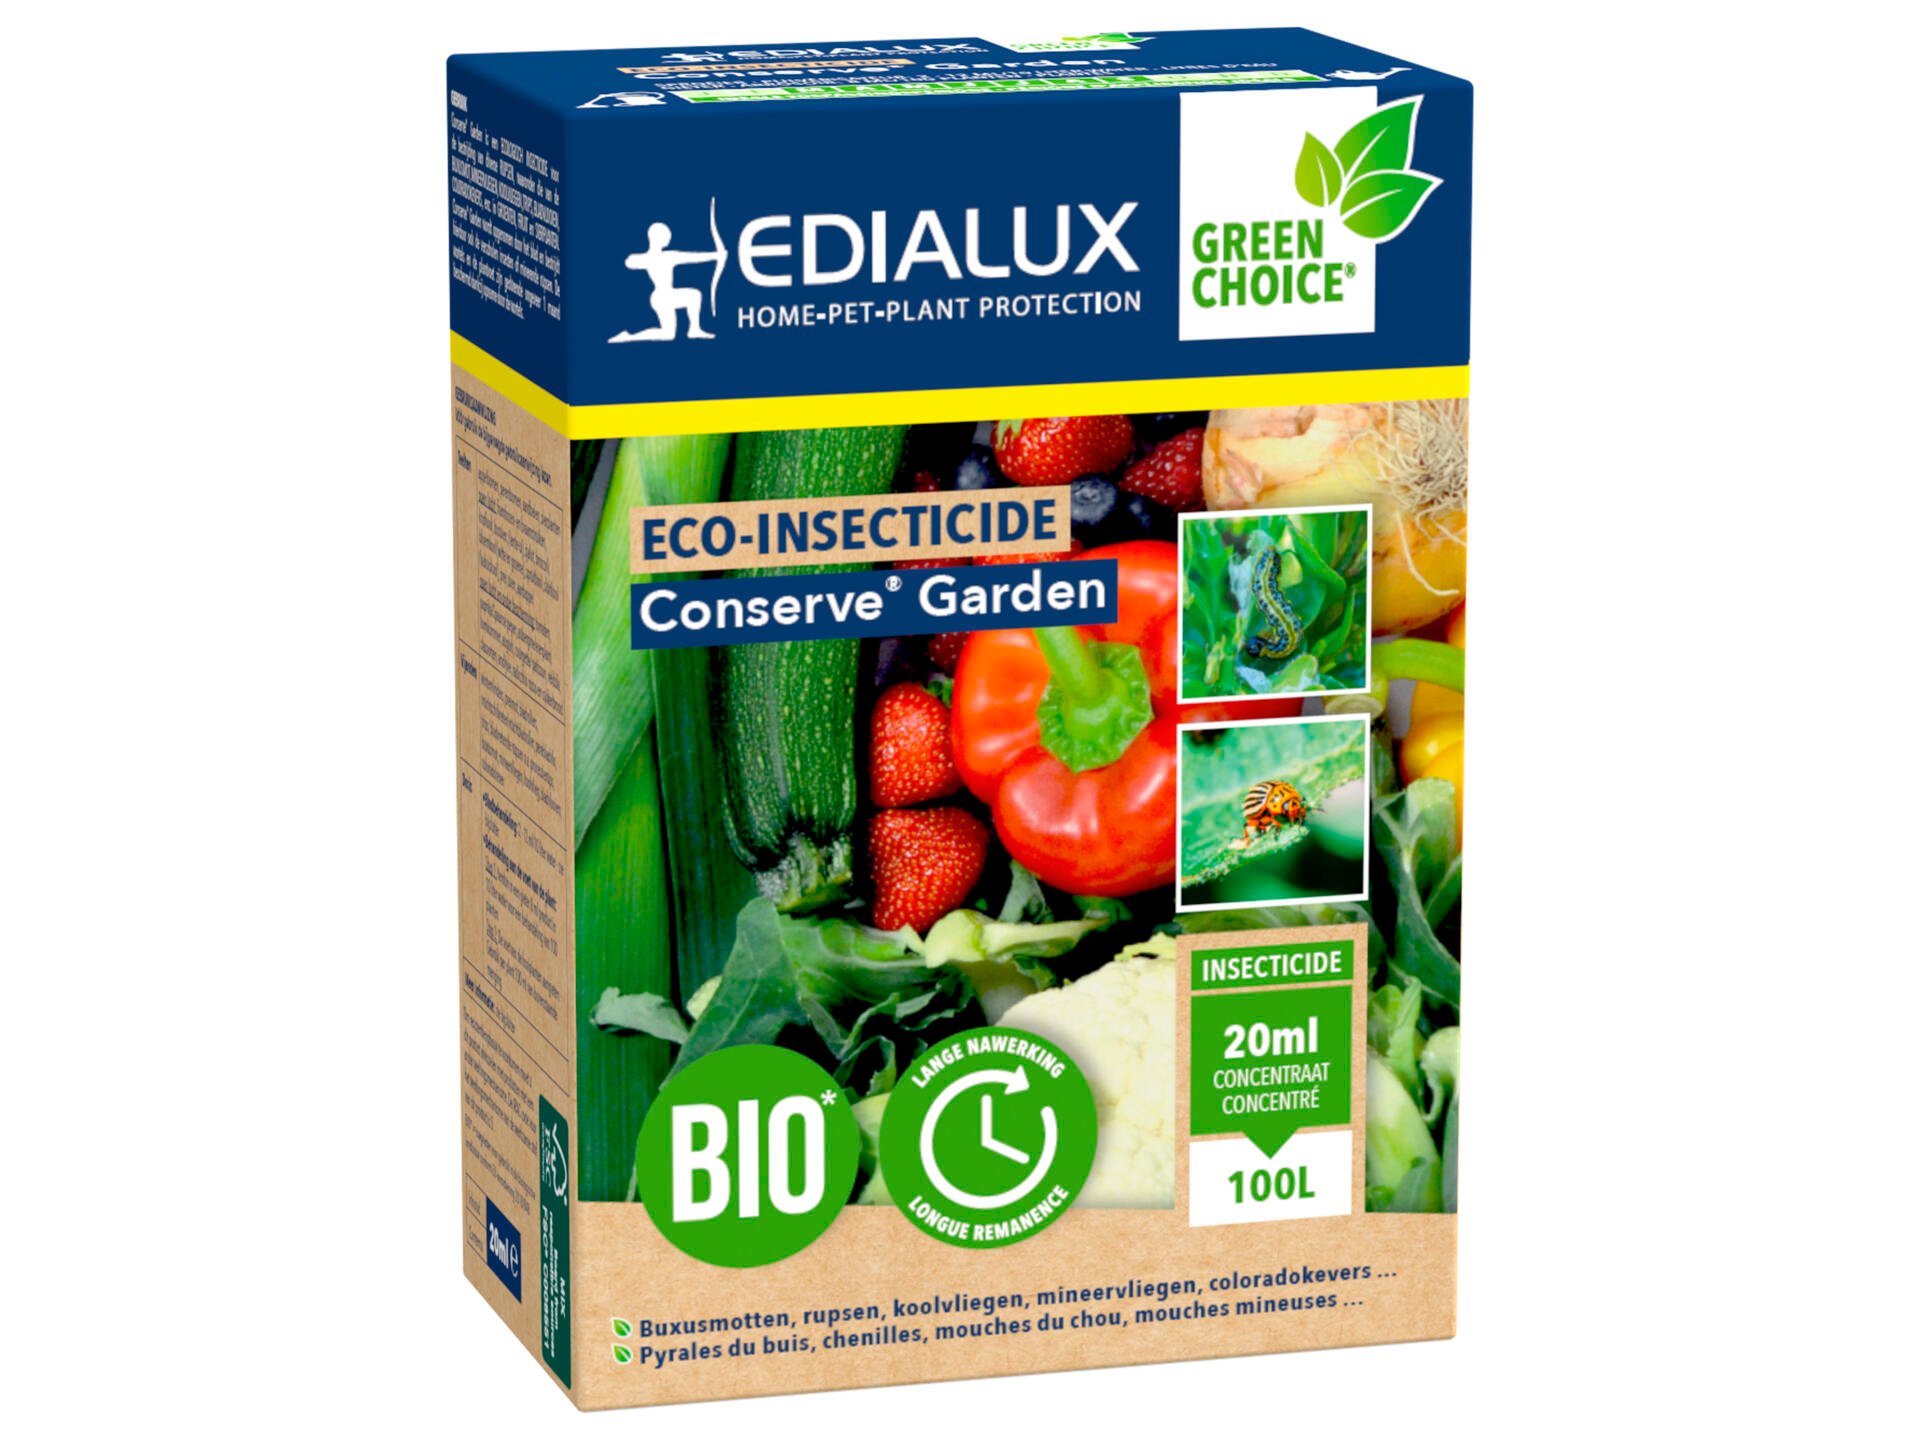 Edialux Conserve Garden insecticide 20ml